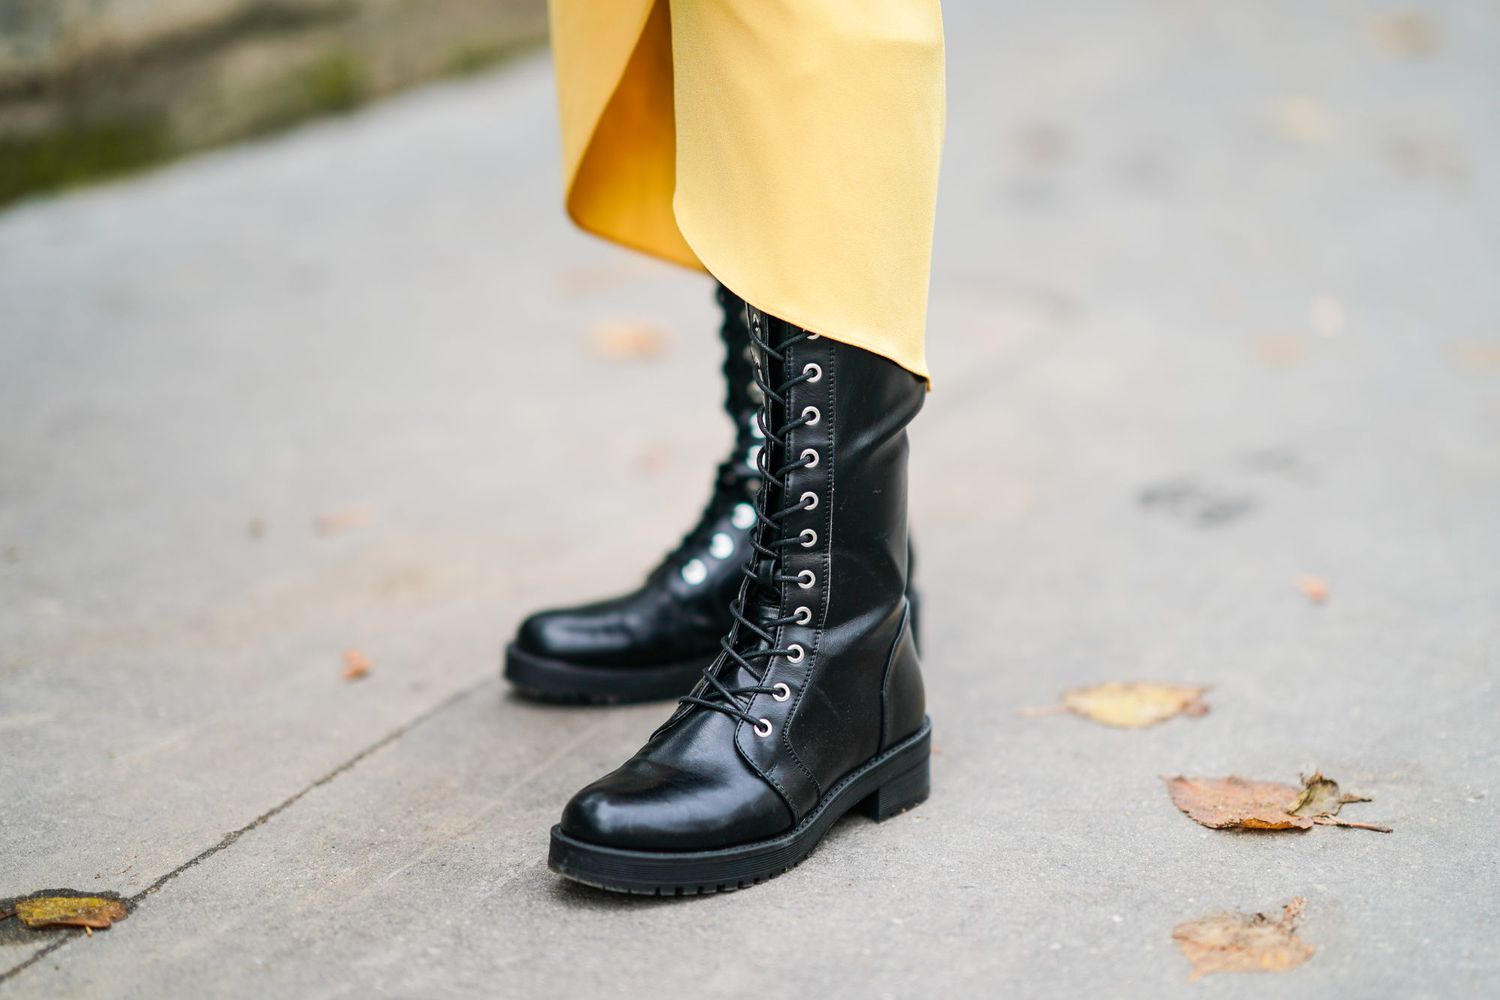 How To Get Boots On With No Zipper